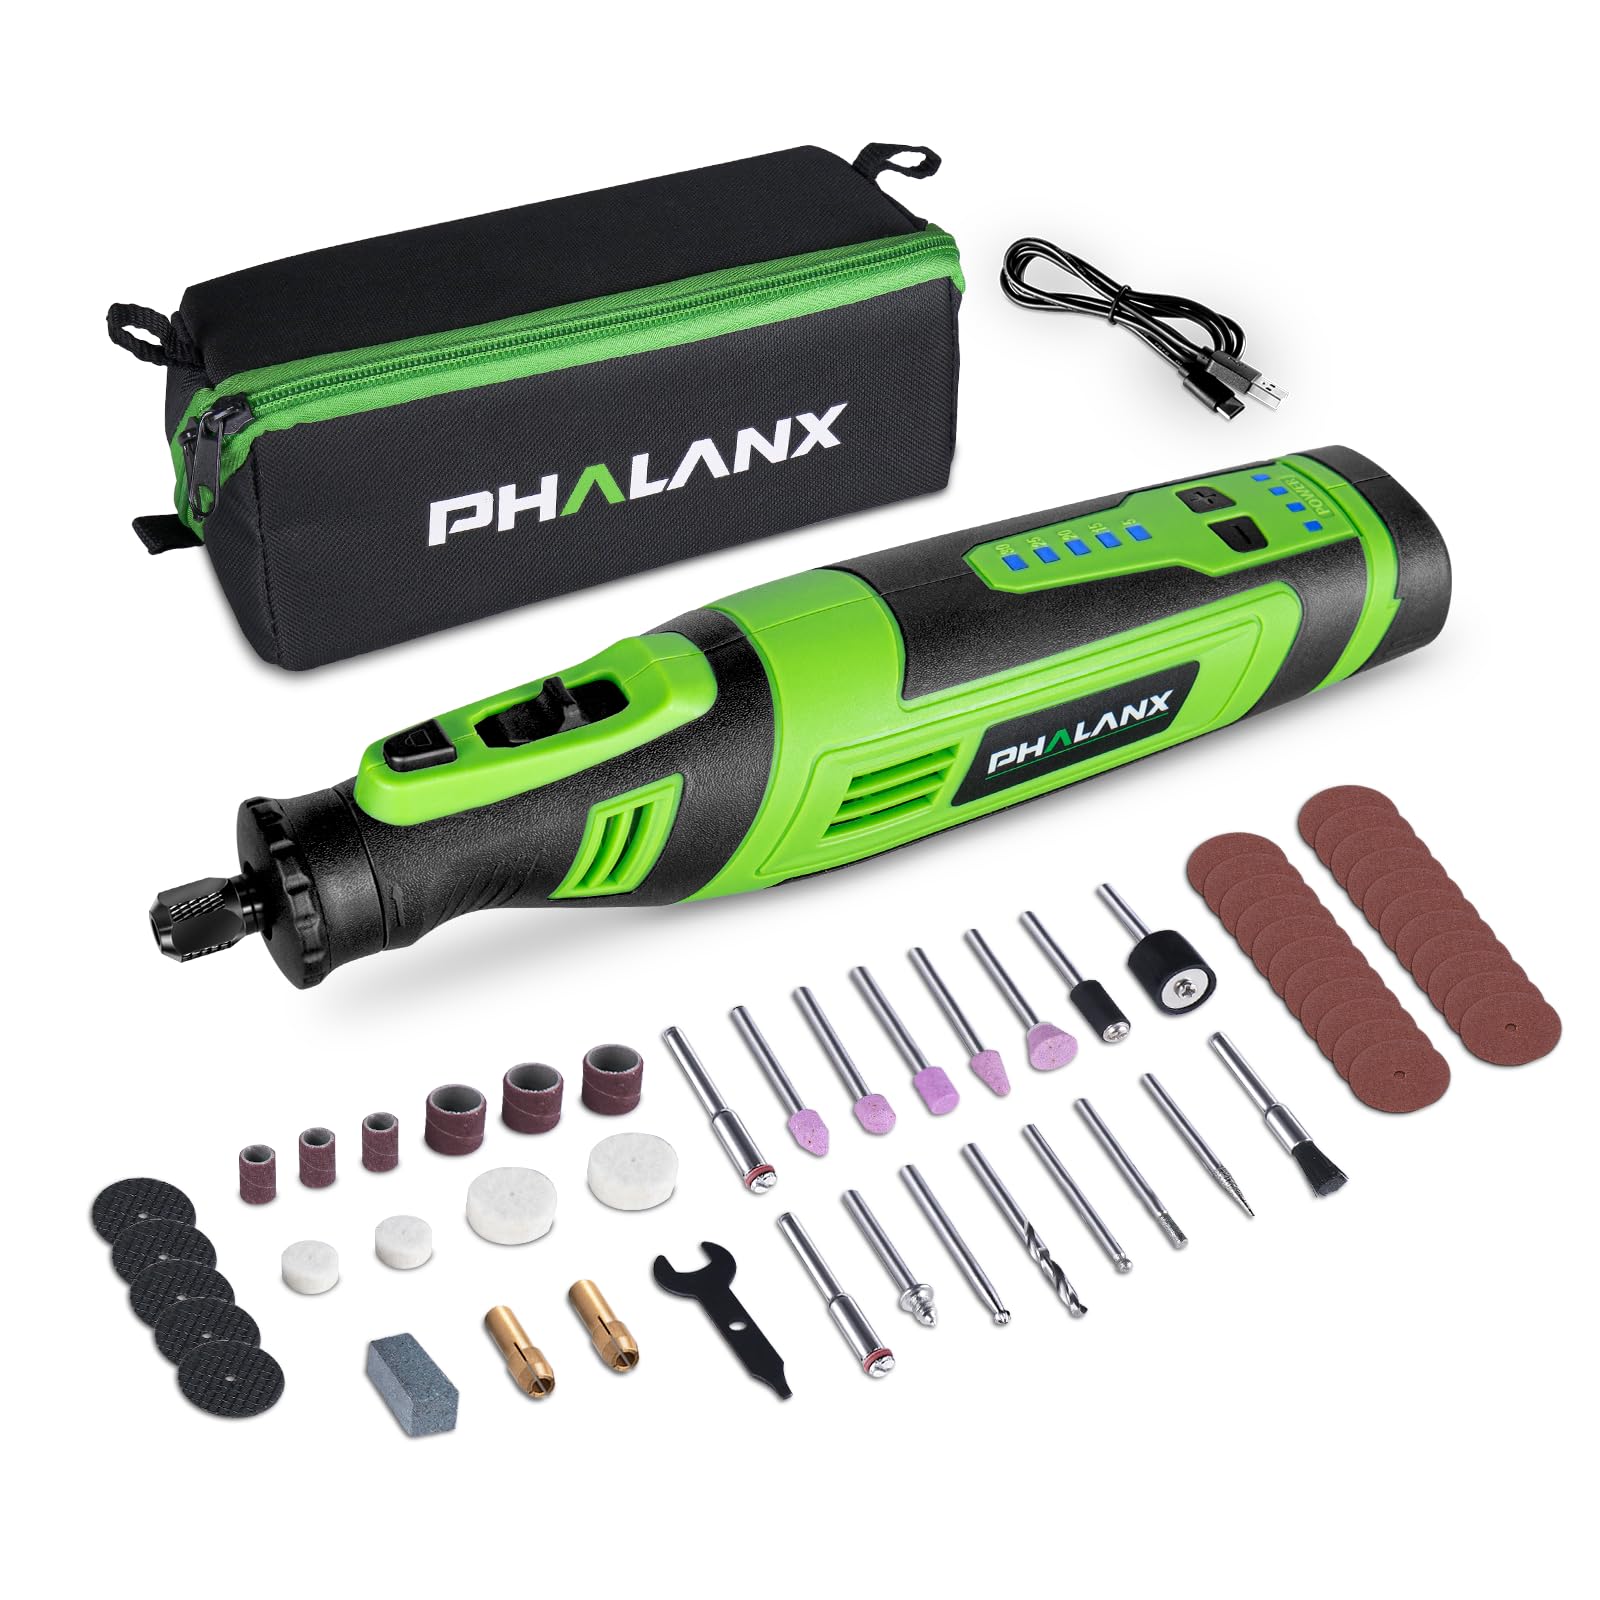 PHALANX 8V Cordless Rotary Tool Kit, 2.0 Ah Battery Rechargeable Rotary Tool with 73pcs Accessories, 5-Speed LED Light, Idea for Sanding, Carving, Polishing, Engraving, Wood Carving, Pet Grooming